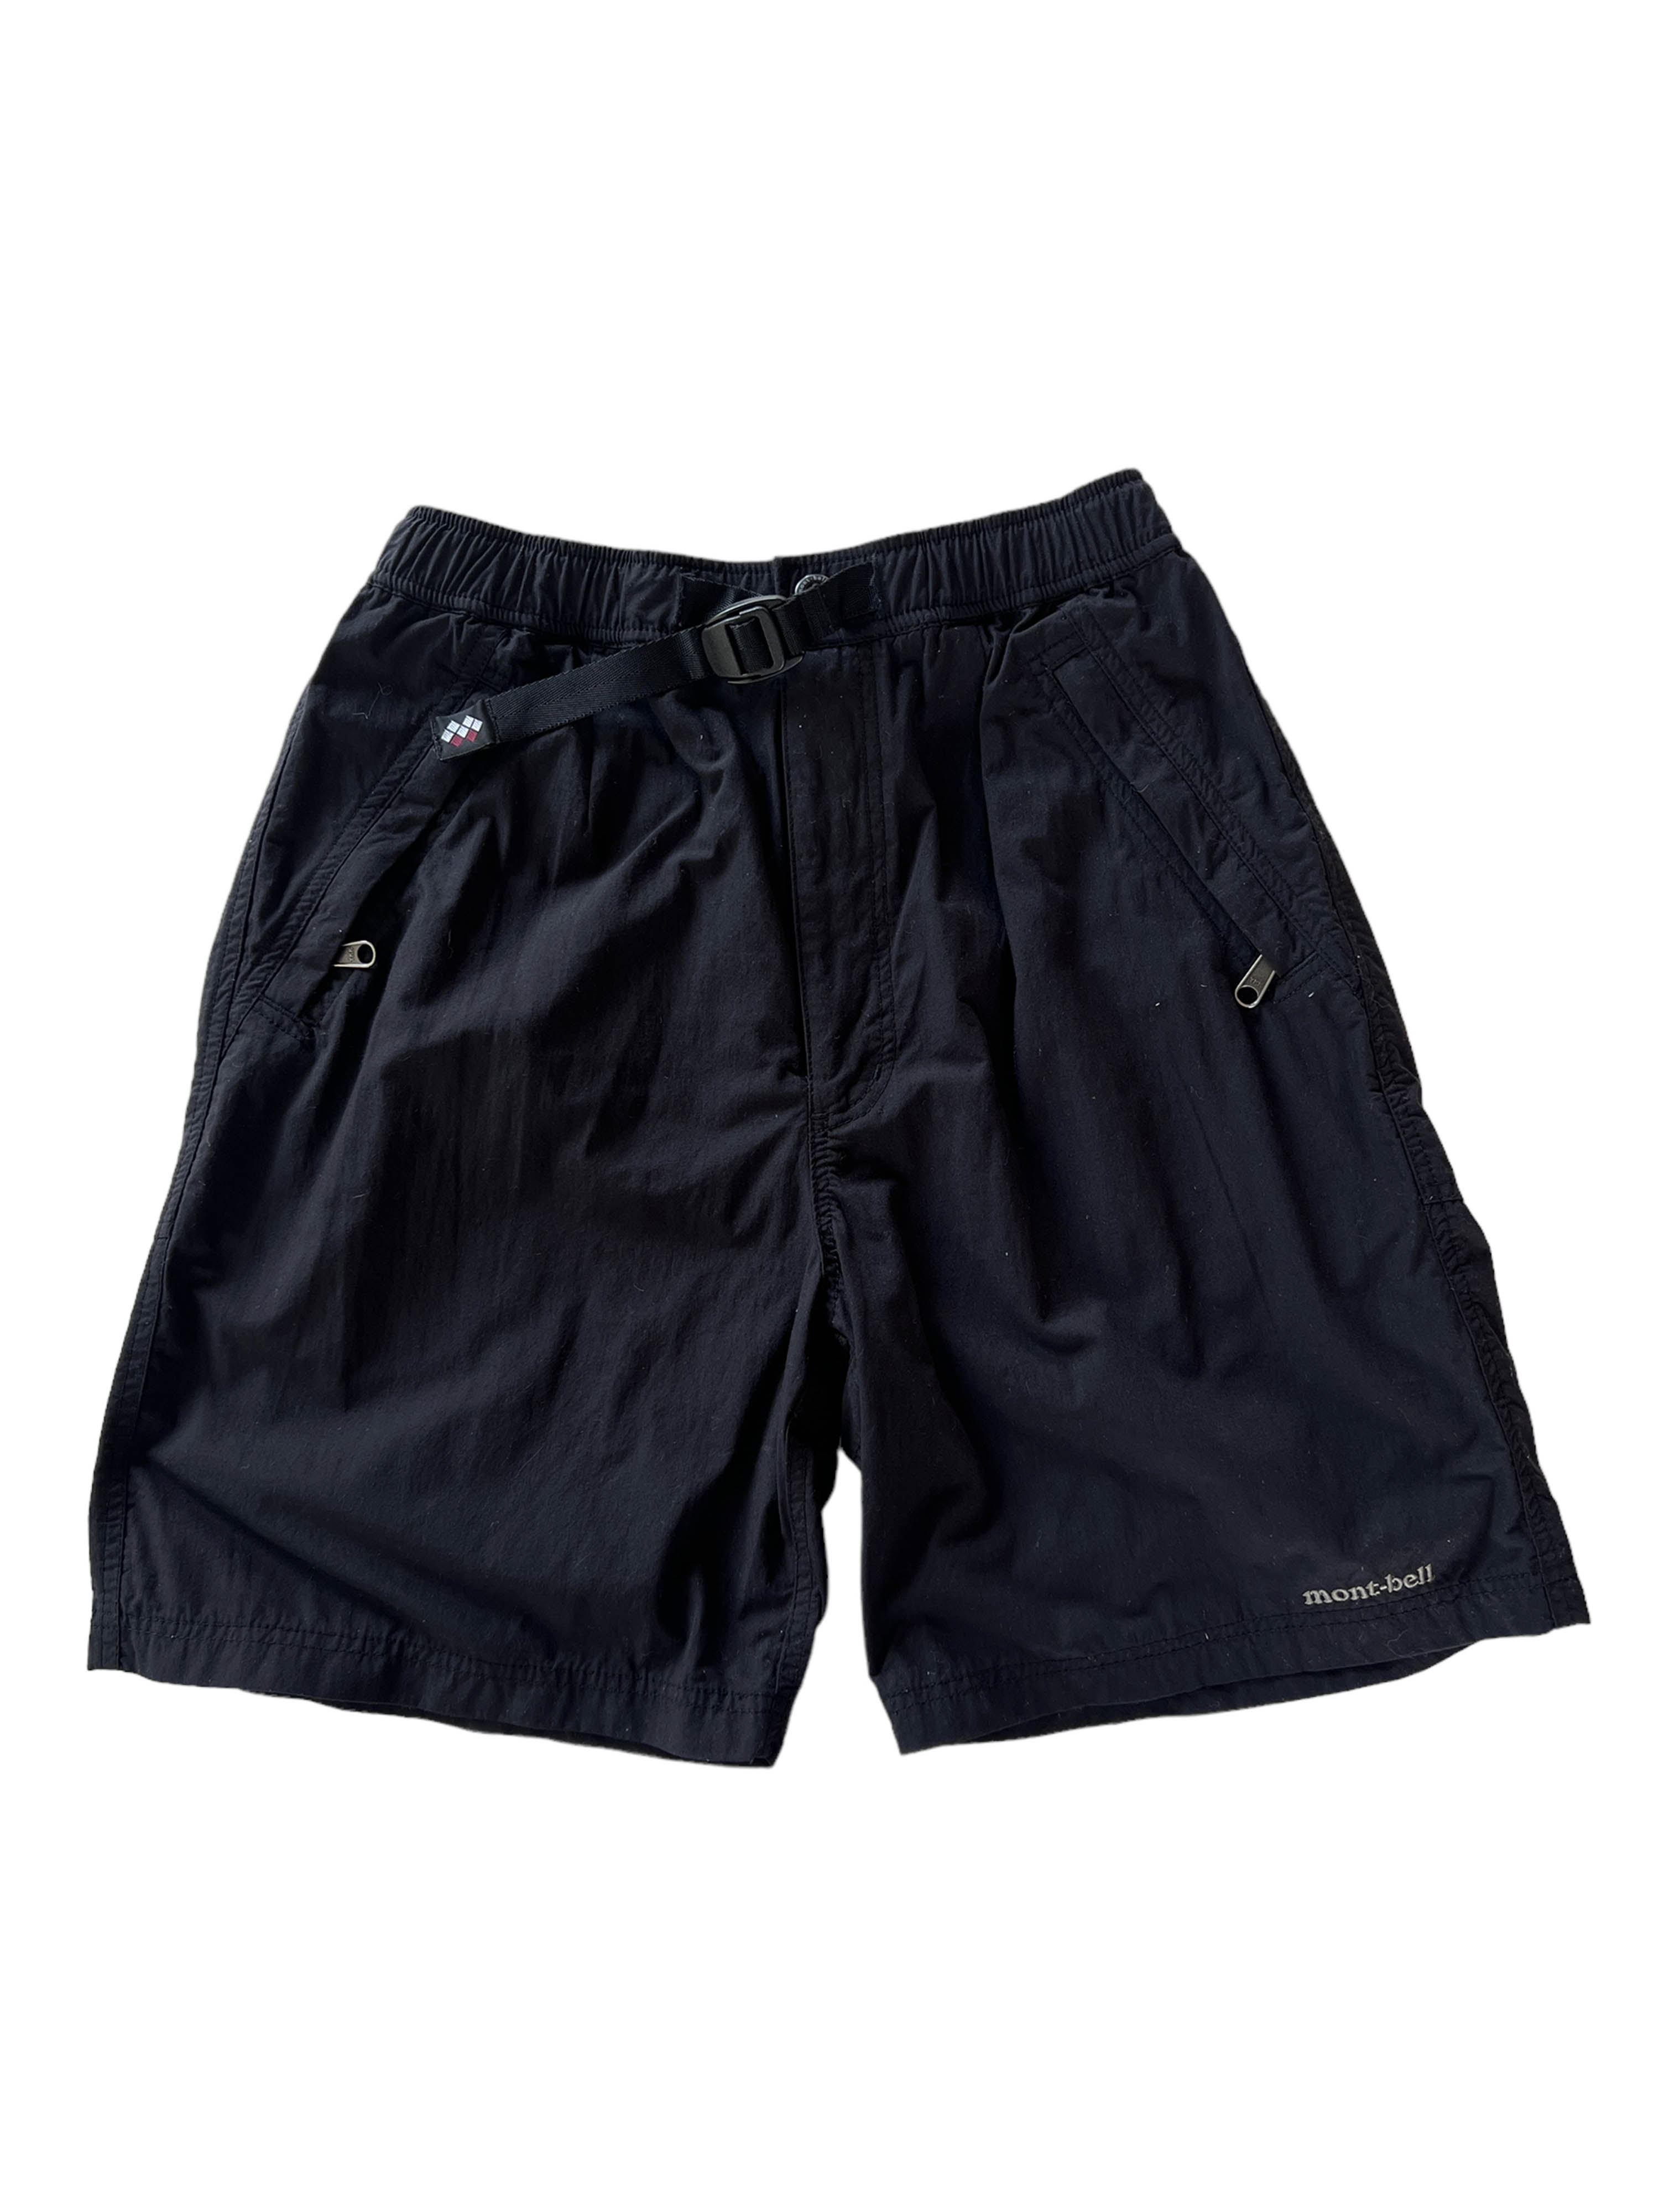 montbell shorts